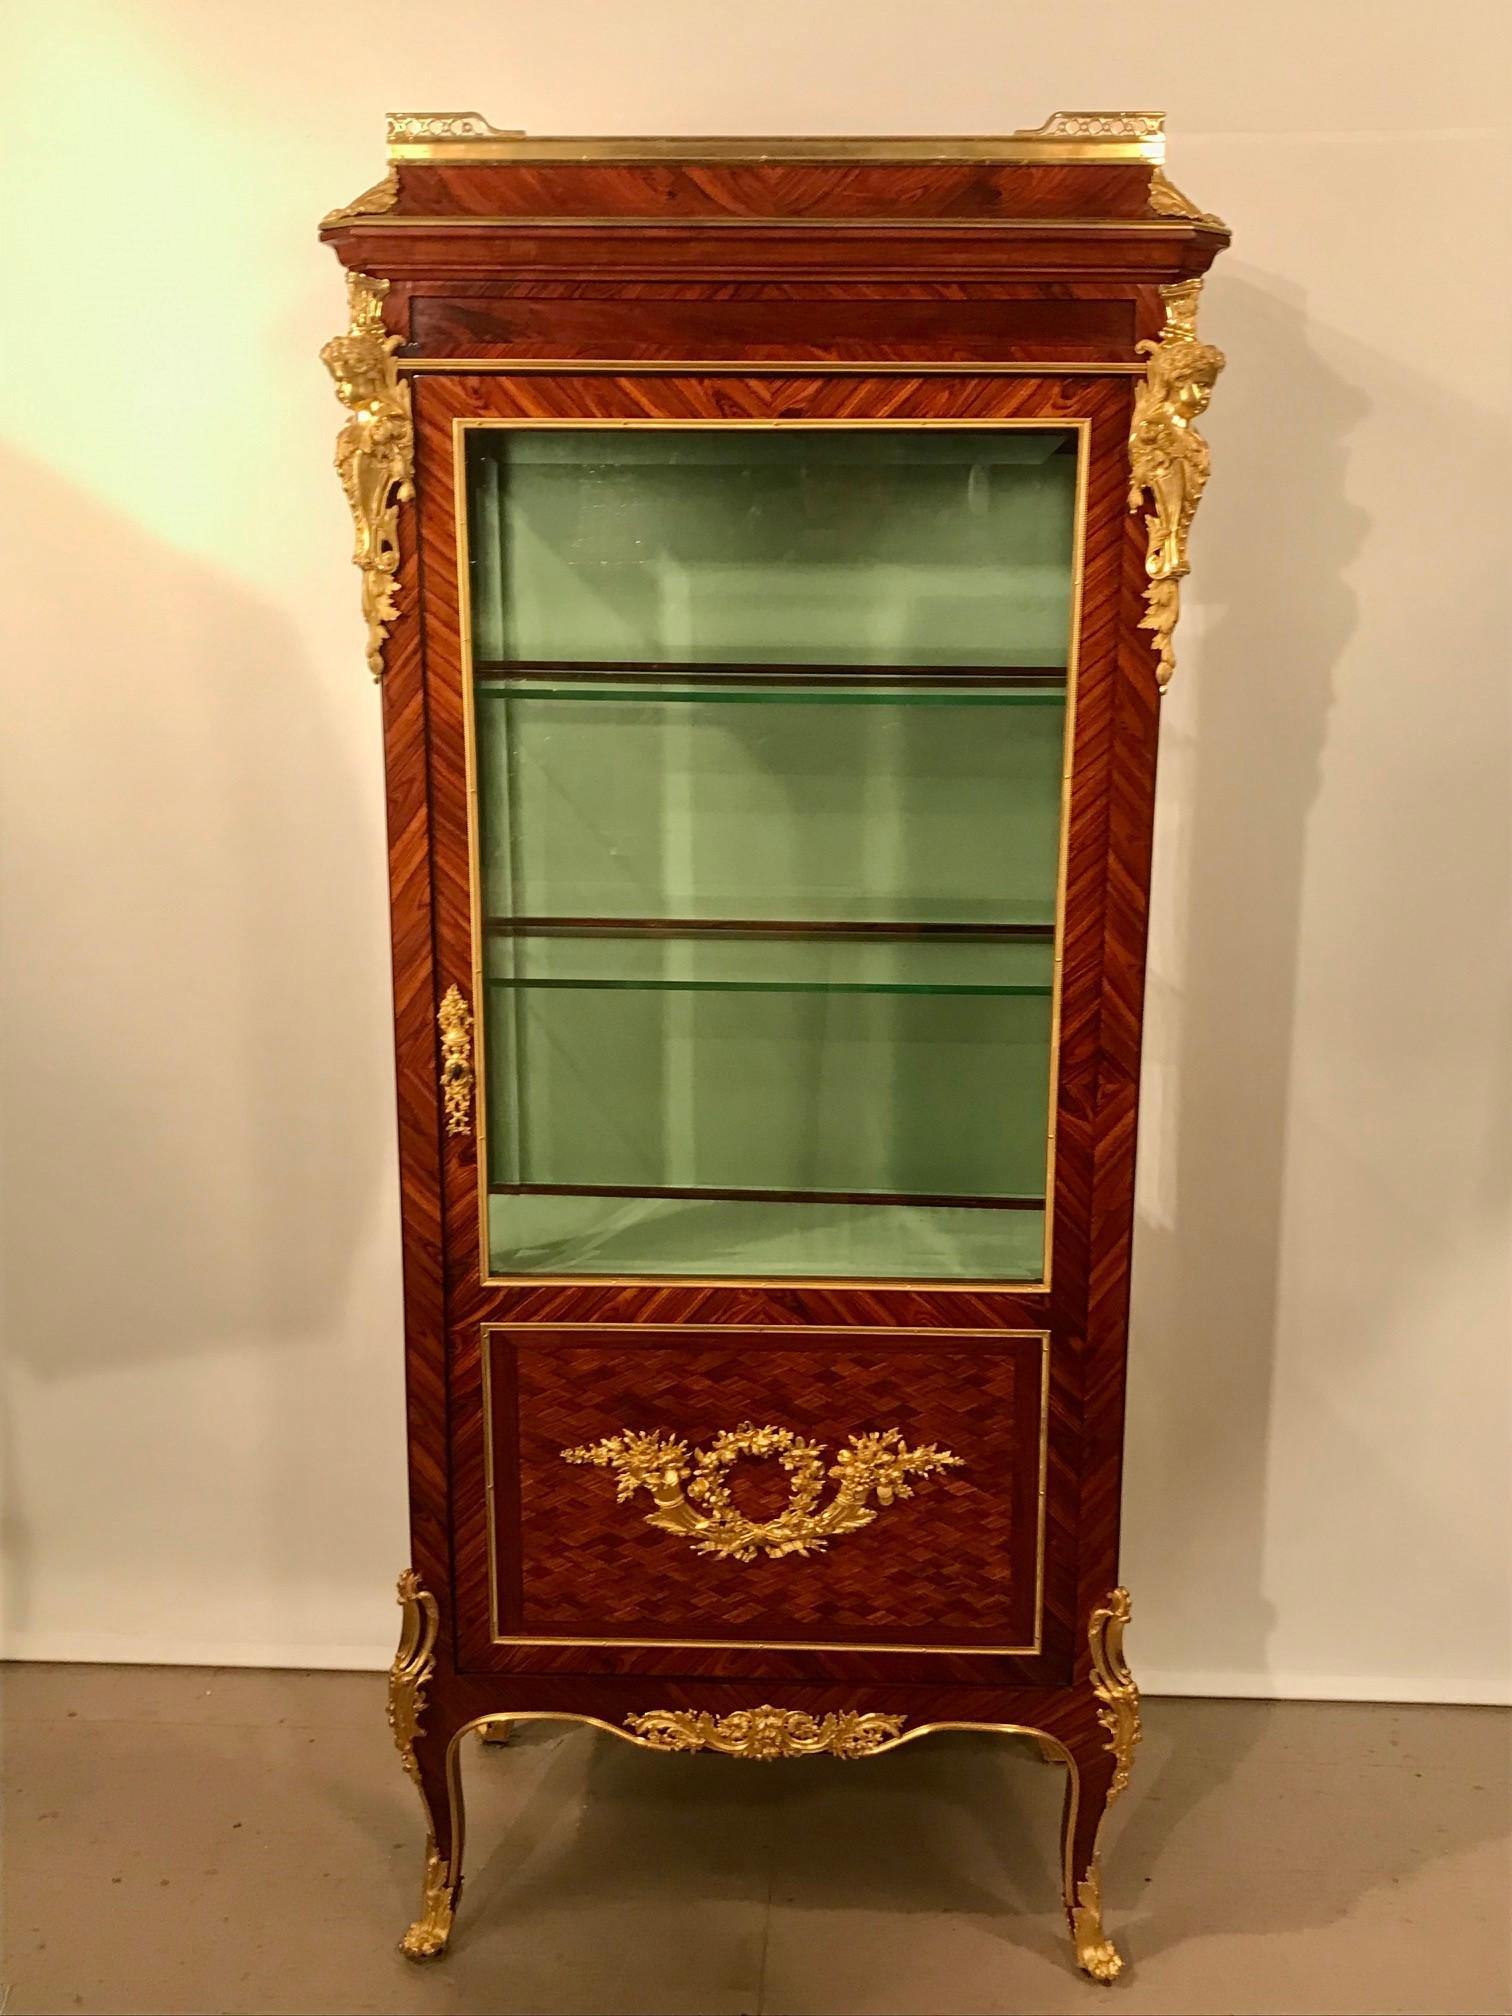 It is difficult to sufficiently describe the quality and workmanship of this vitrine; the photos show more than any words can relate. The mounts are to the standard of the great Linke and may prove to be from his own workshop. Those which flank the